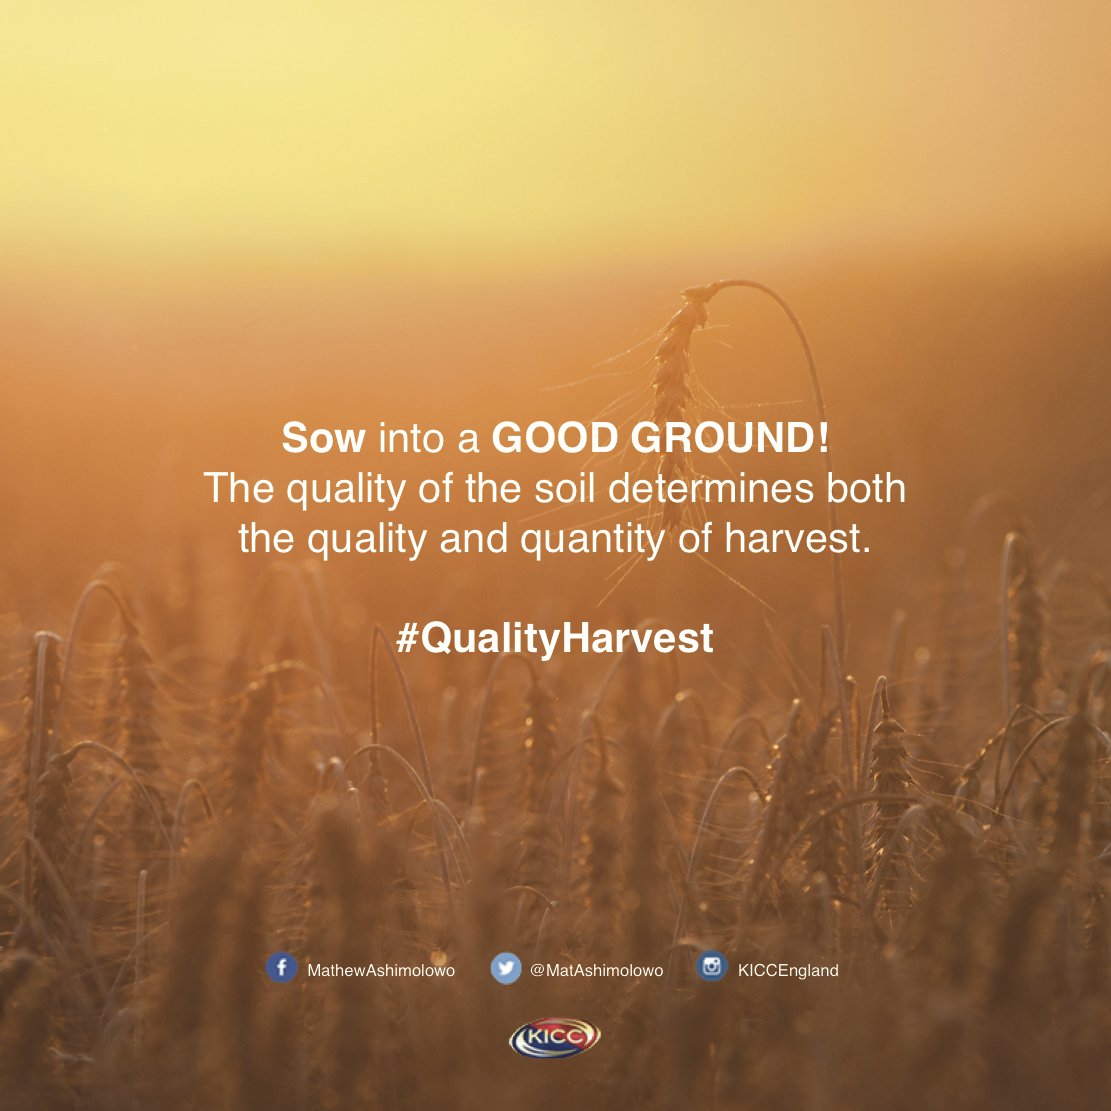 Take time to prepare a seed and plant it where GOD directs you for a #QualityHarvest